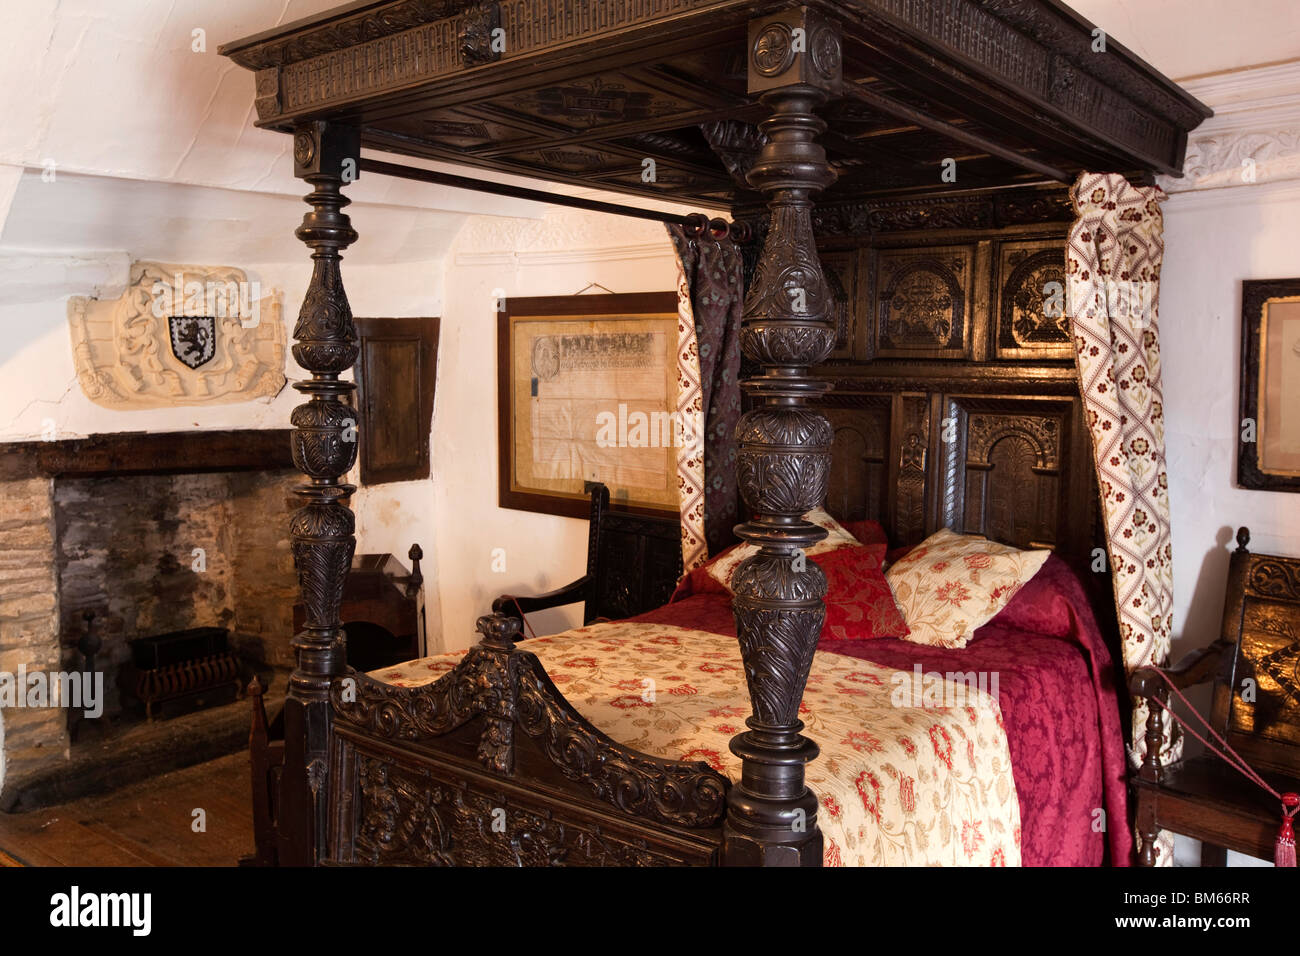 UK, England, Devon, Ilfracombe, Chambercombe Manor, bedroom with Elizabethan Four Poster bed Stock Photo